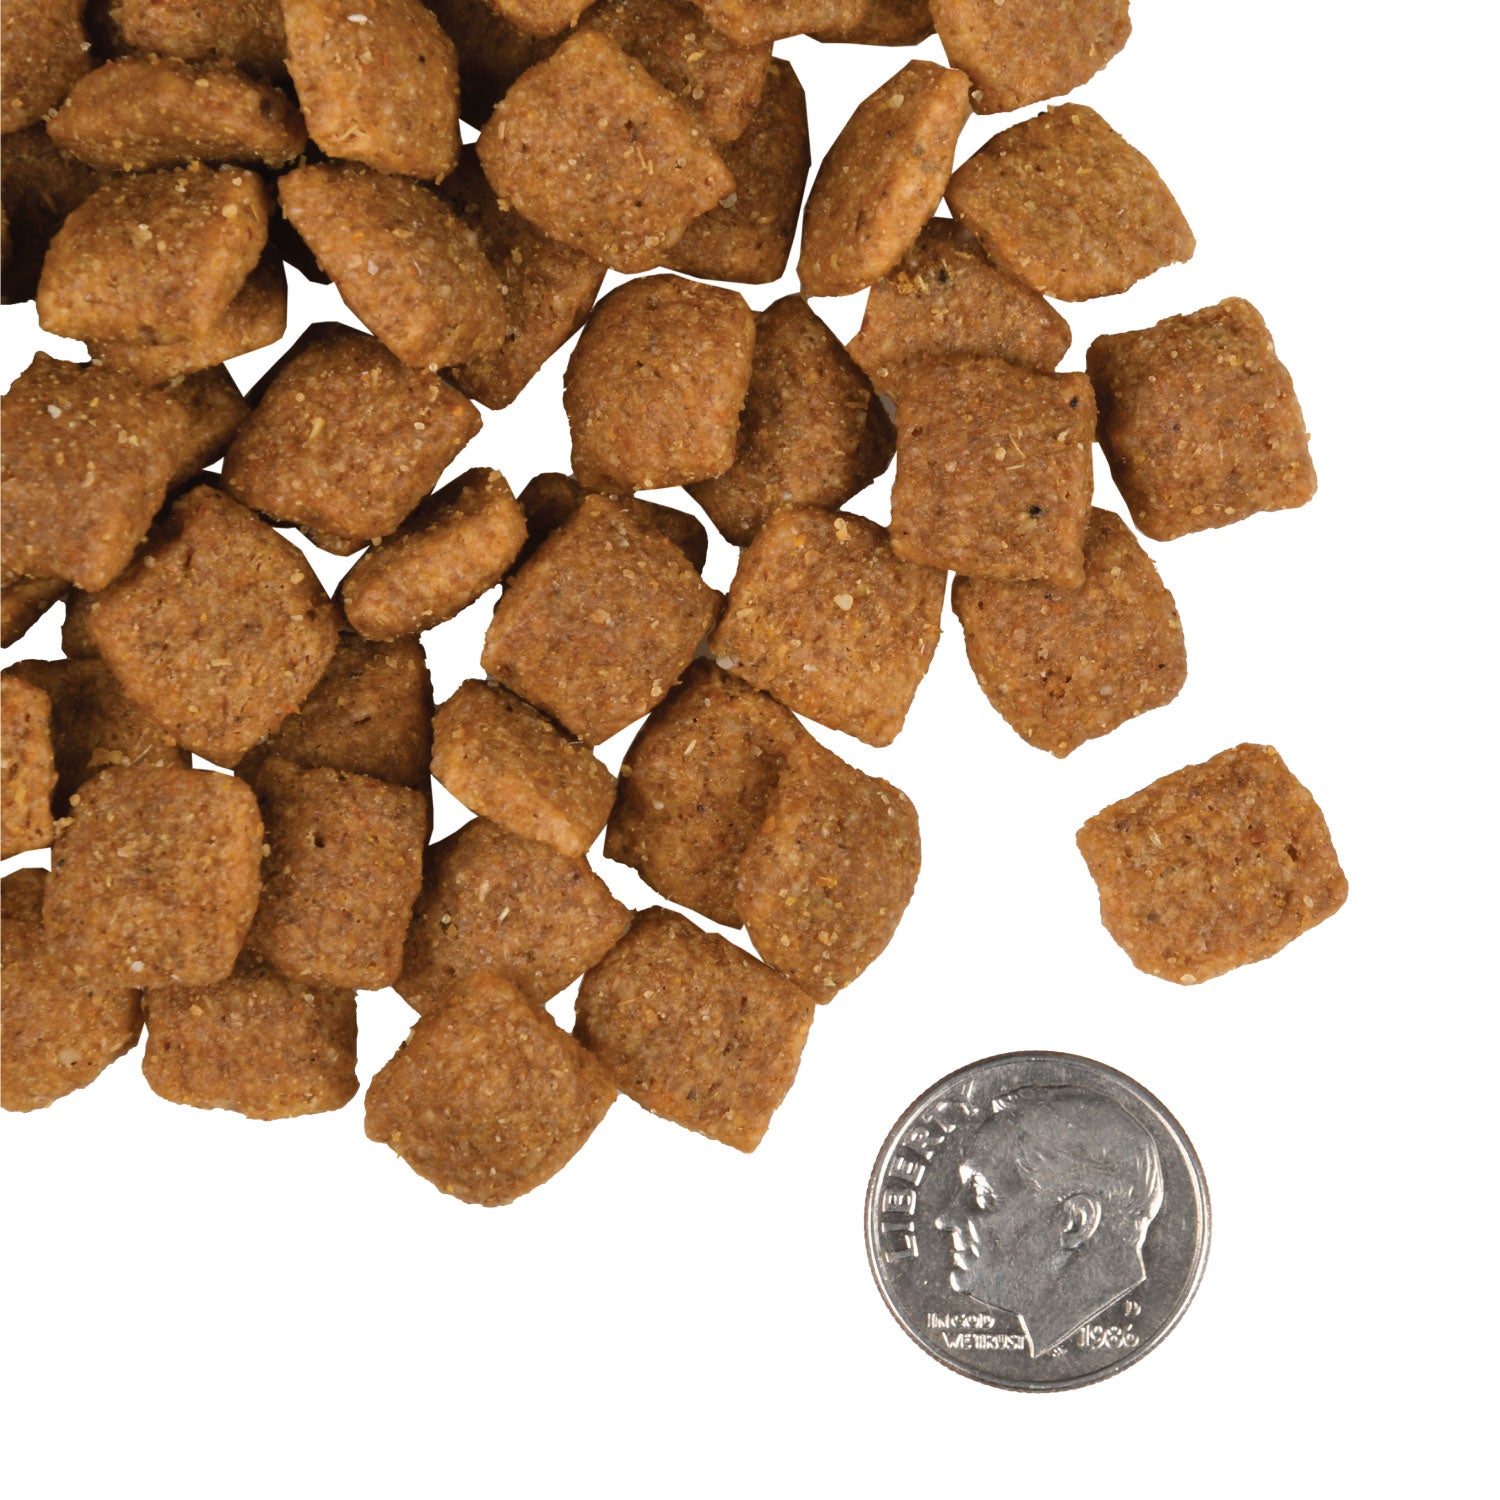 Fromm - Adult Gold (Dry Dog Food)